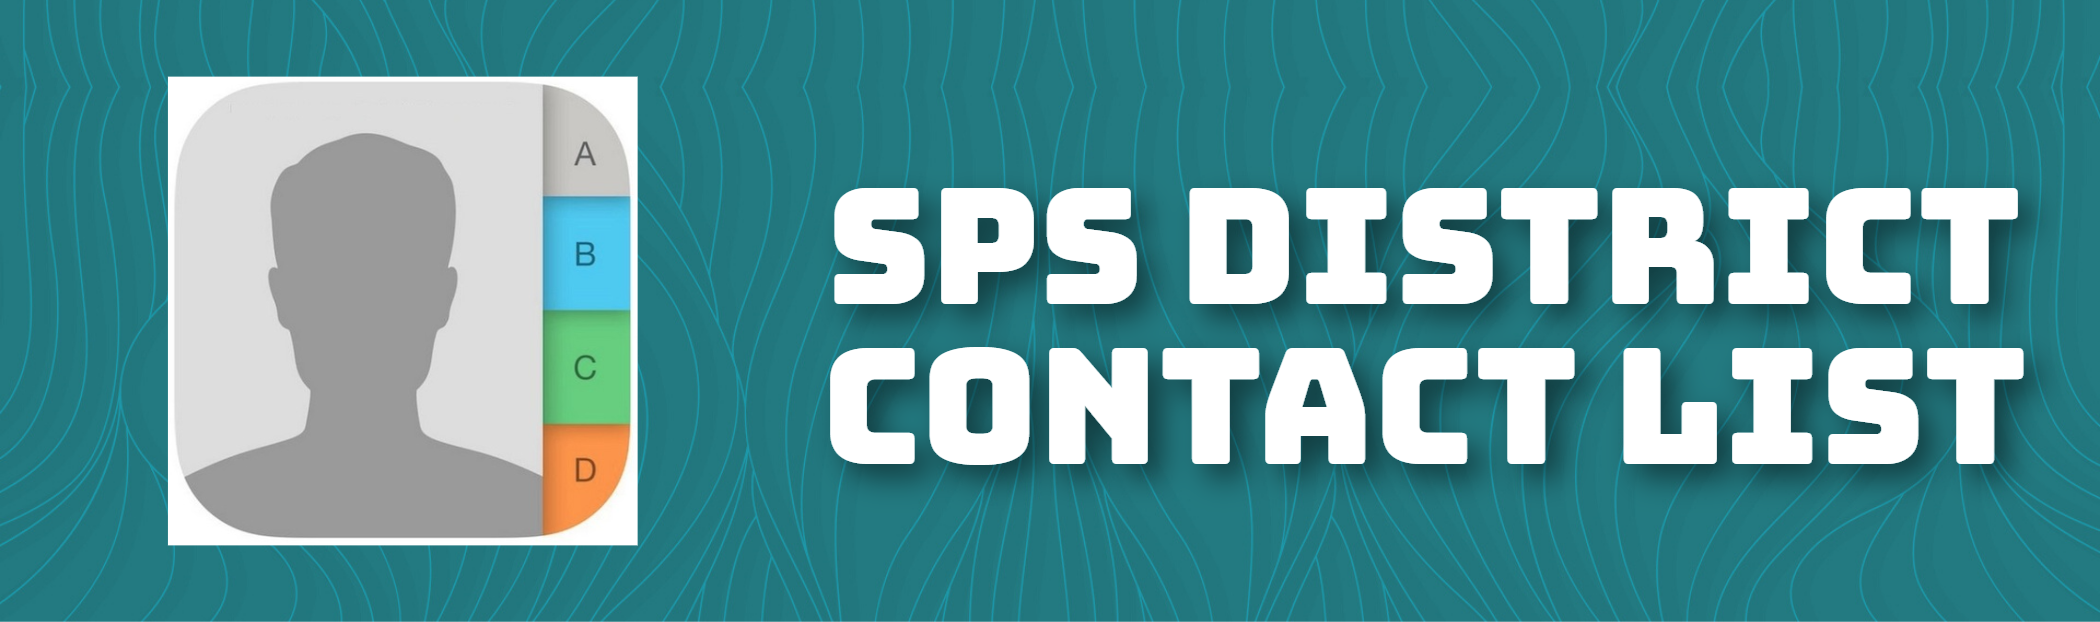 SPS District Contact List